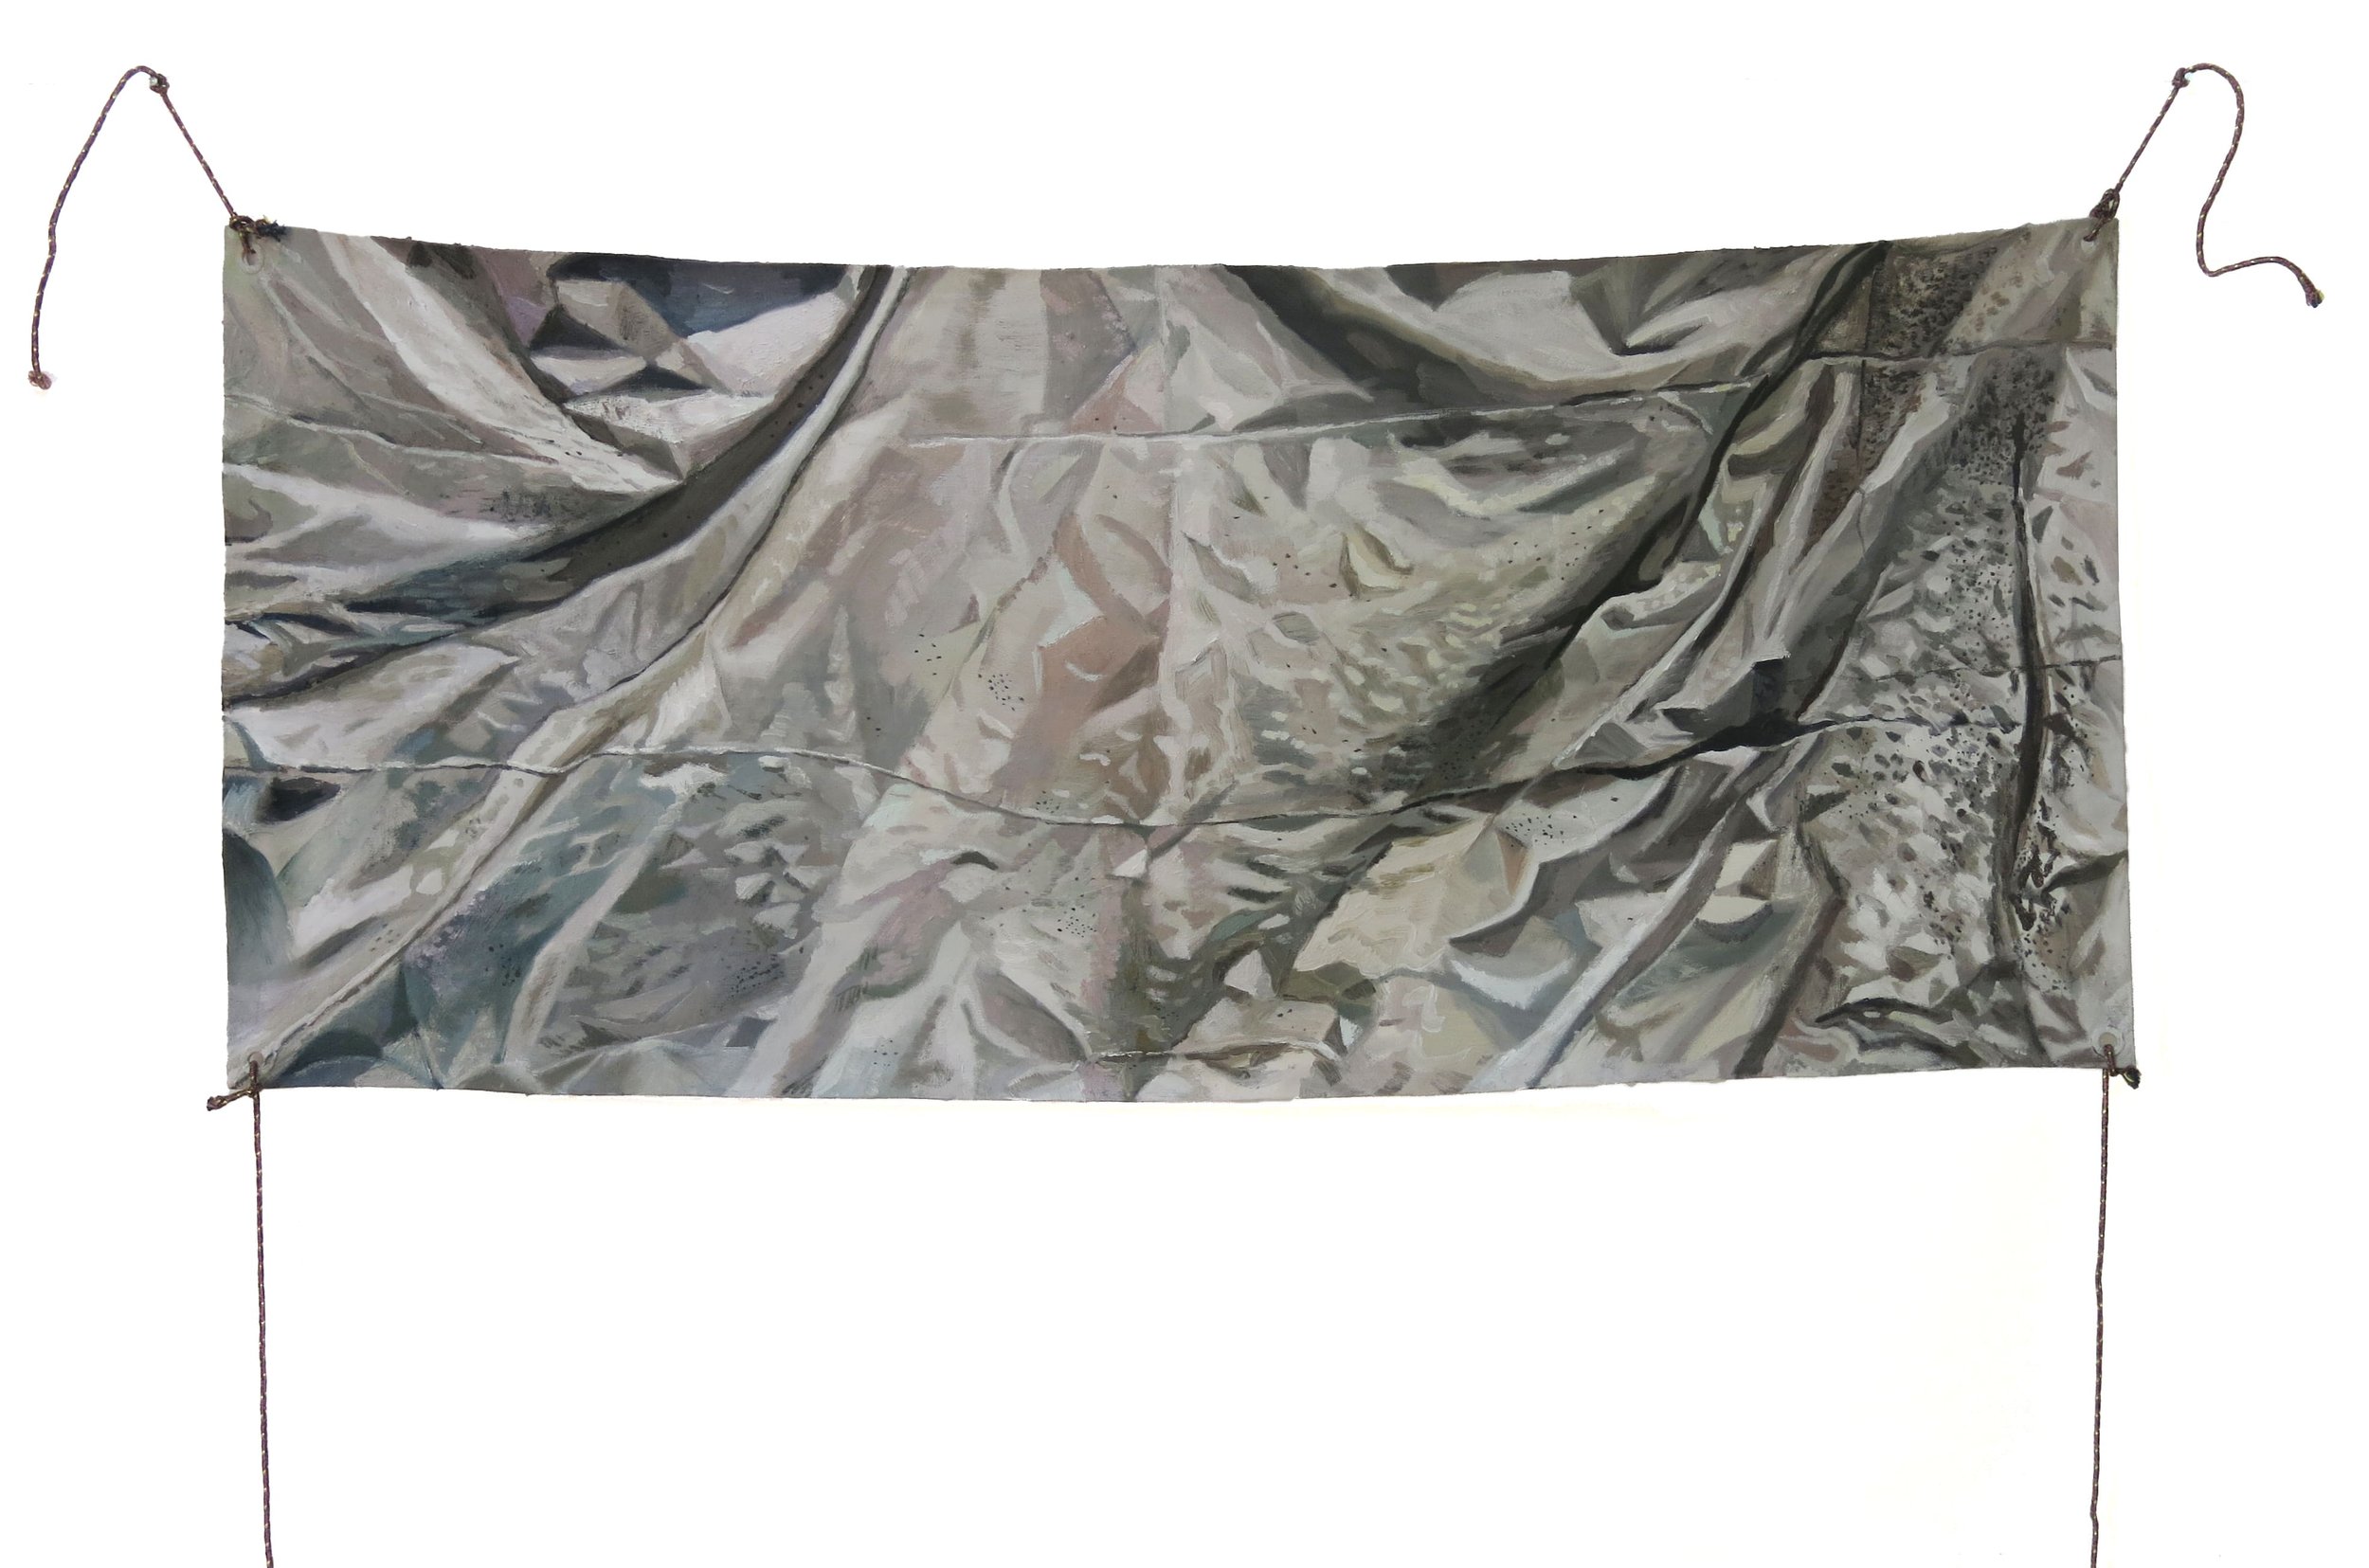   A Whiter Shade Of Pale   2023, Oil on canvas  H59 x W132.5 cm 